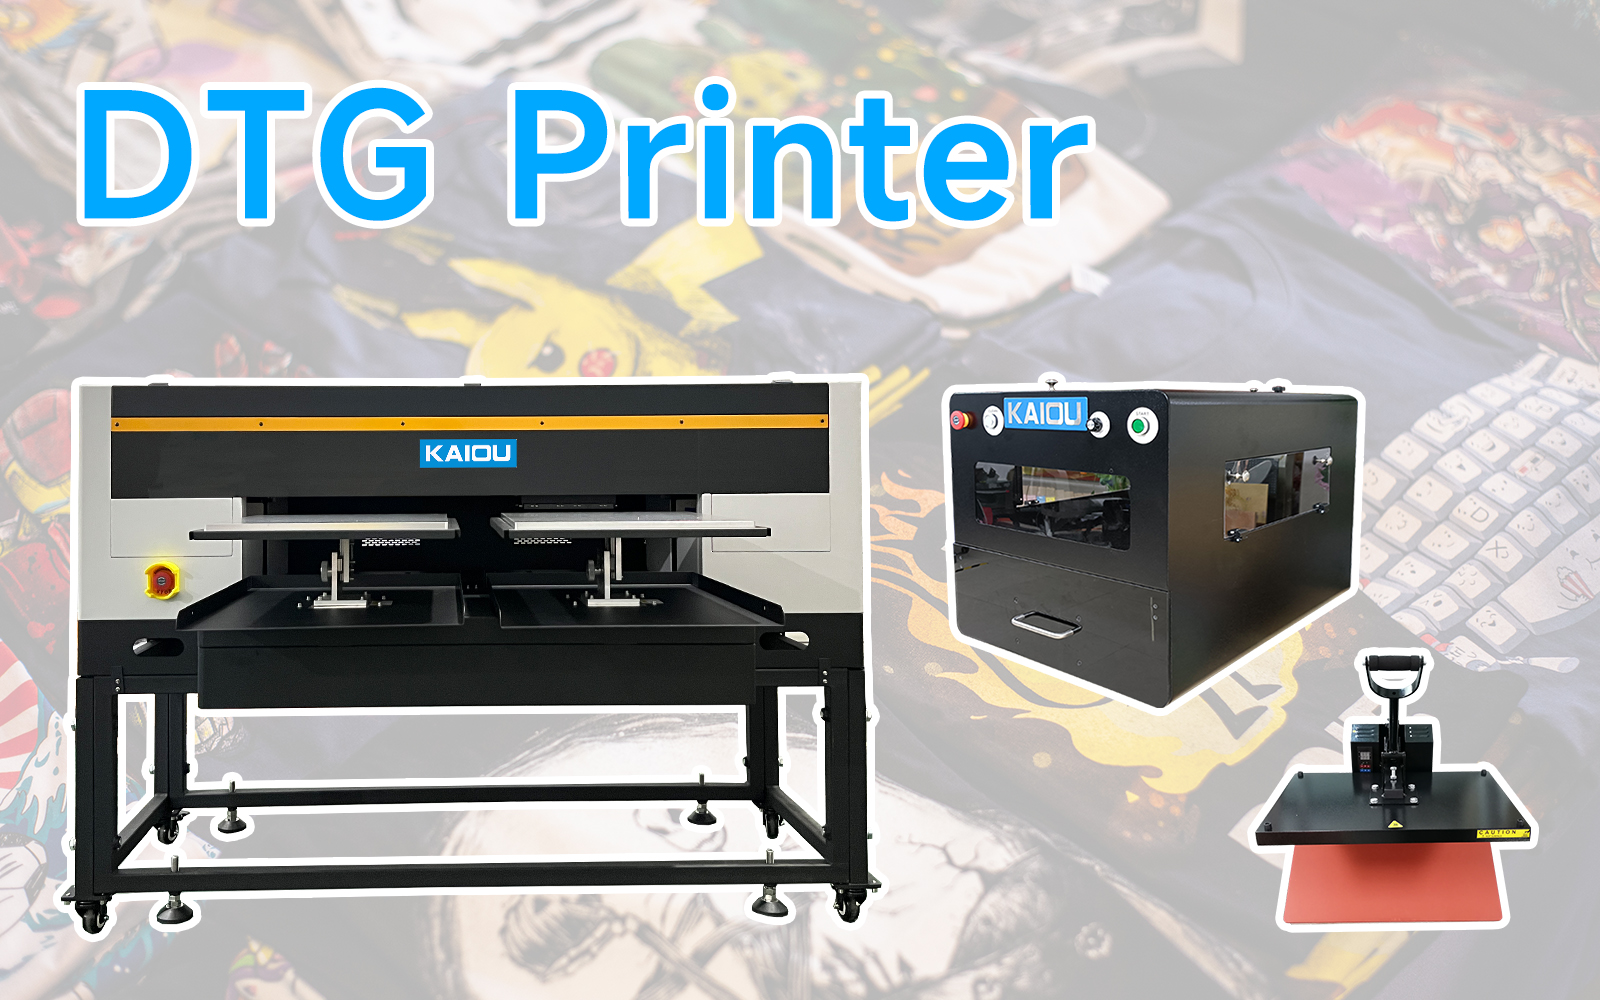 DTG printer advantages and costs